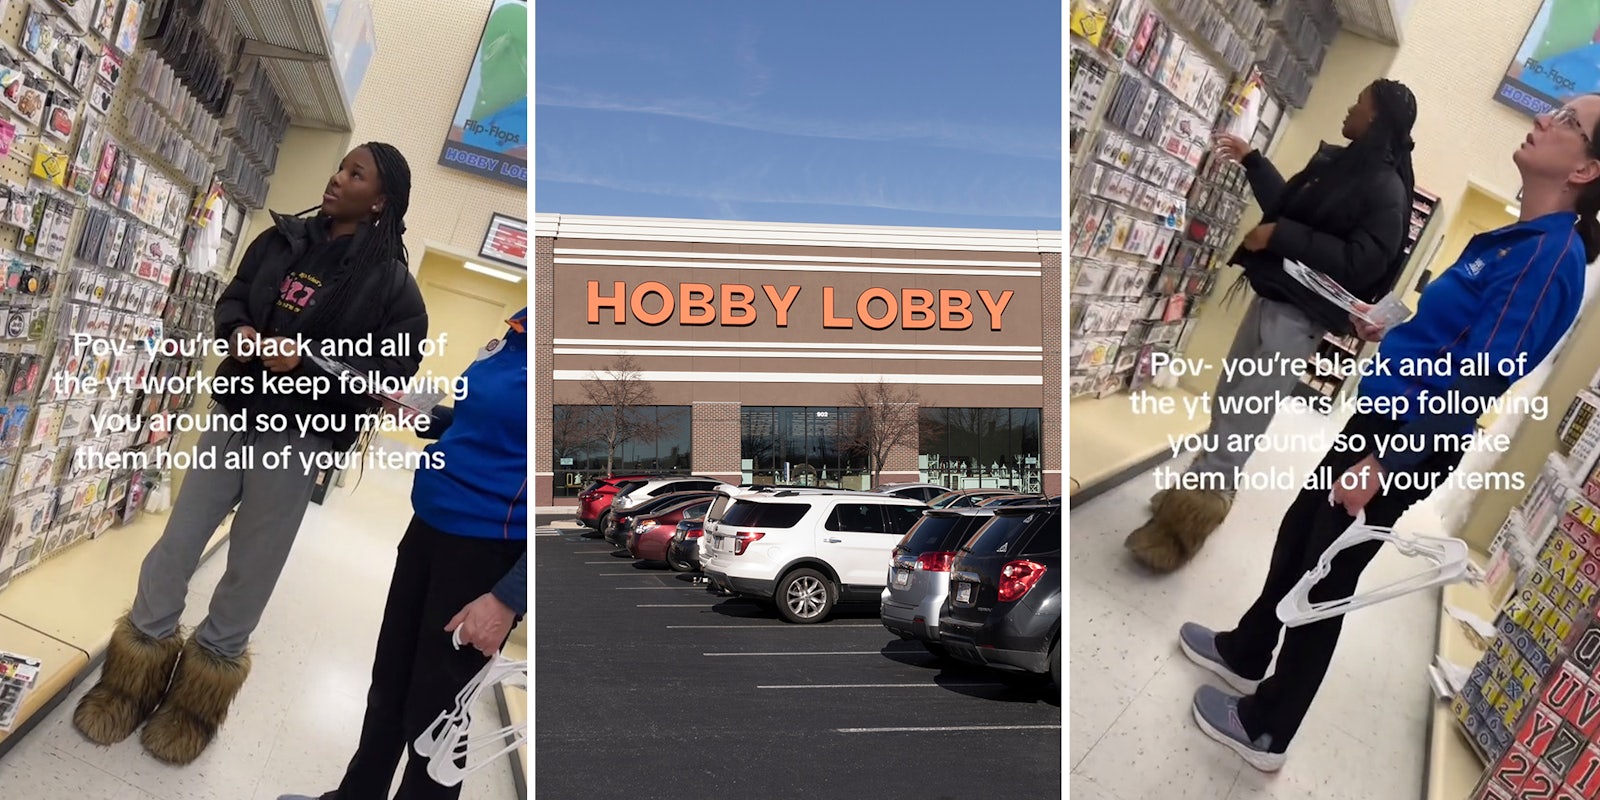 Black customer says Hobby Lobby workers kept following her.